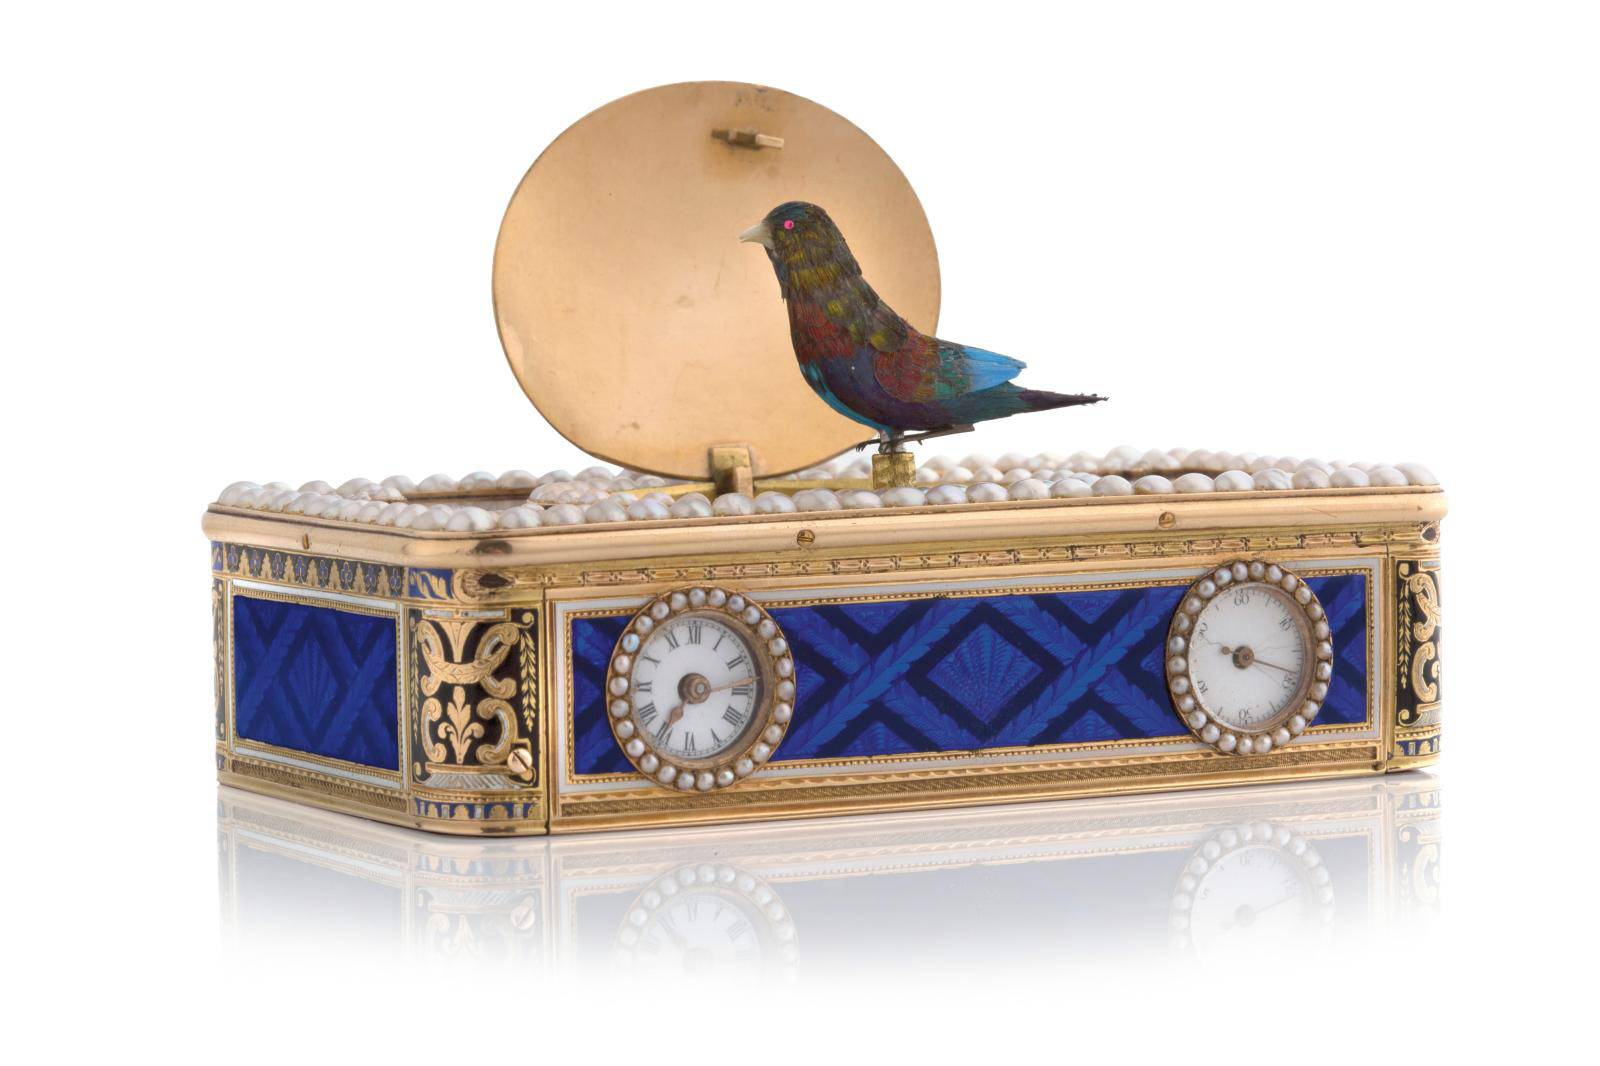 Watch Collection: A Singing Bird and Precious Timepiece